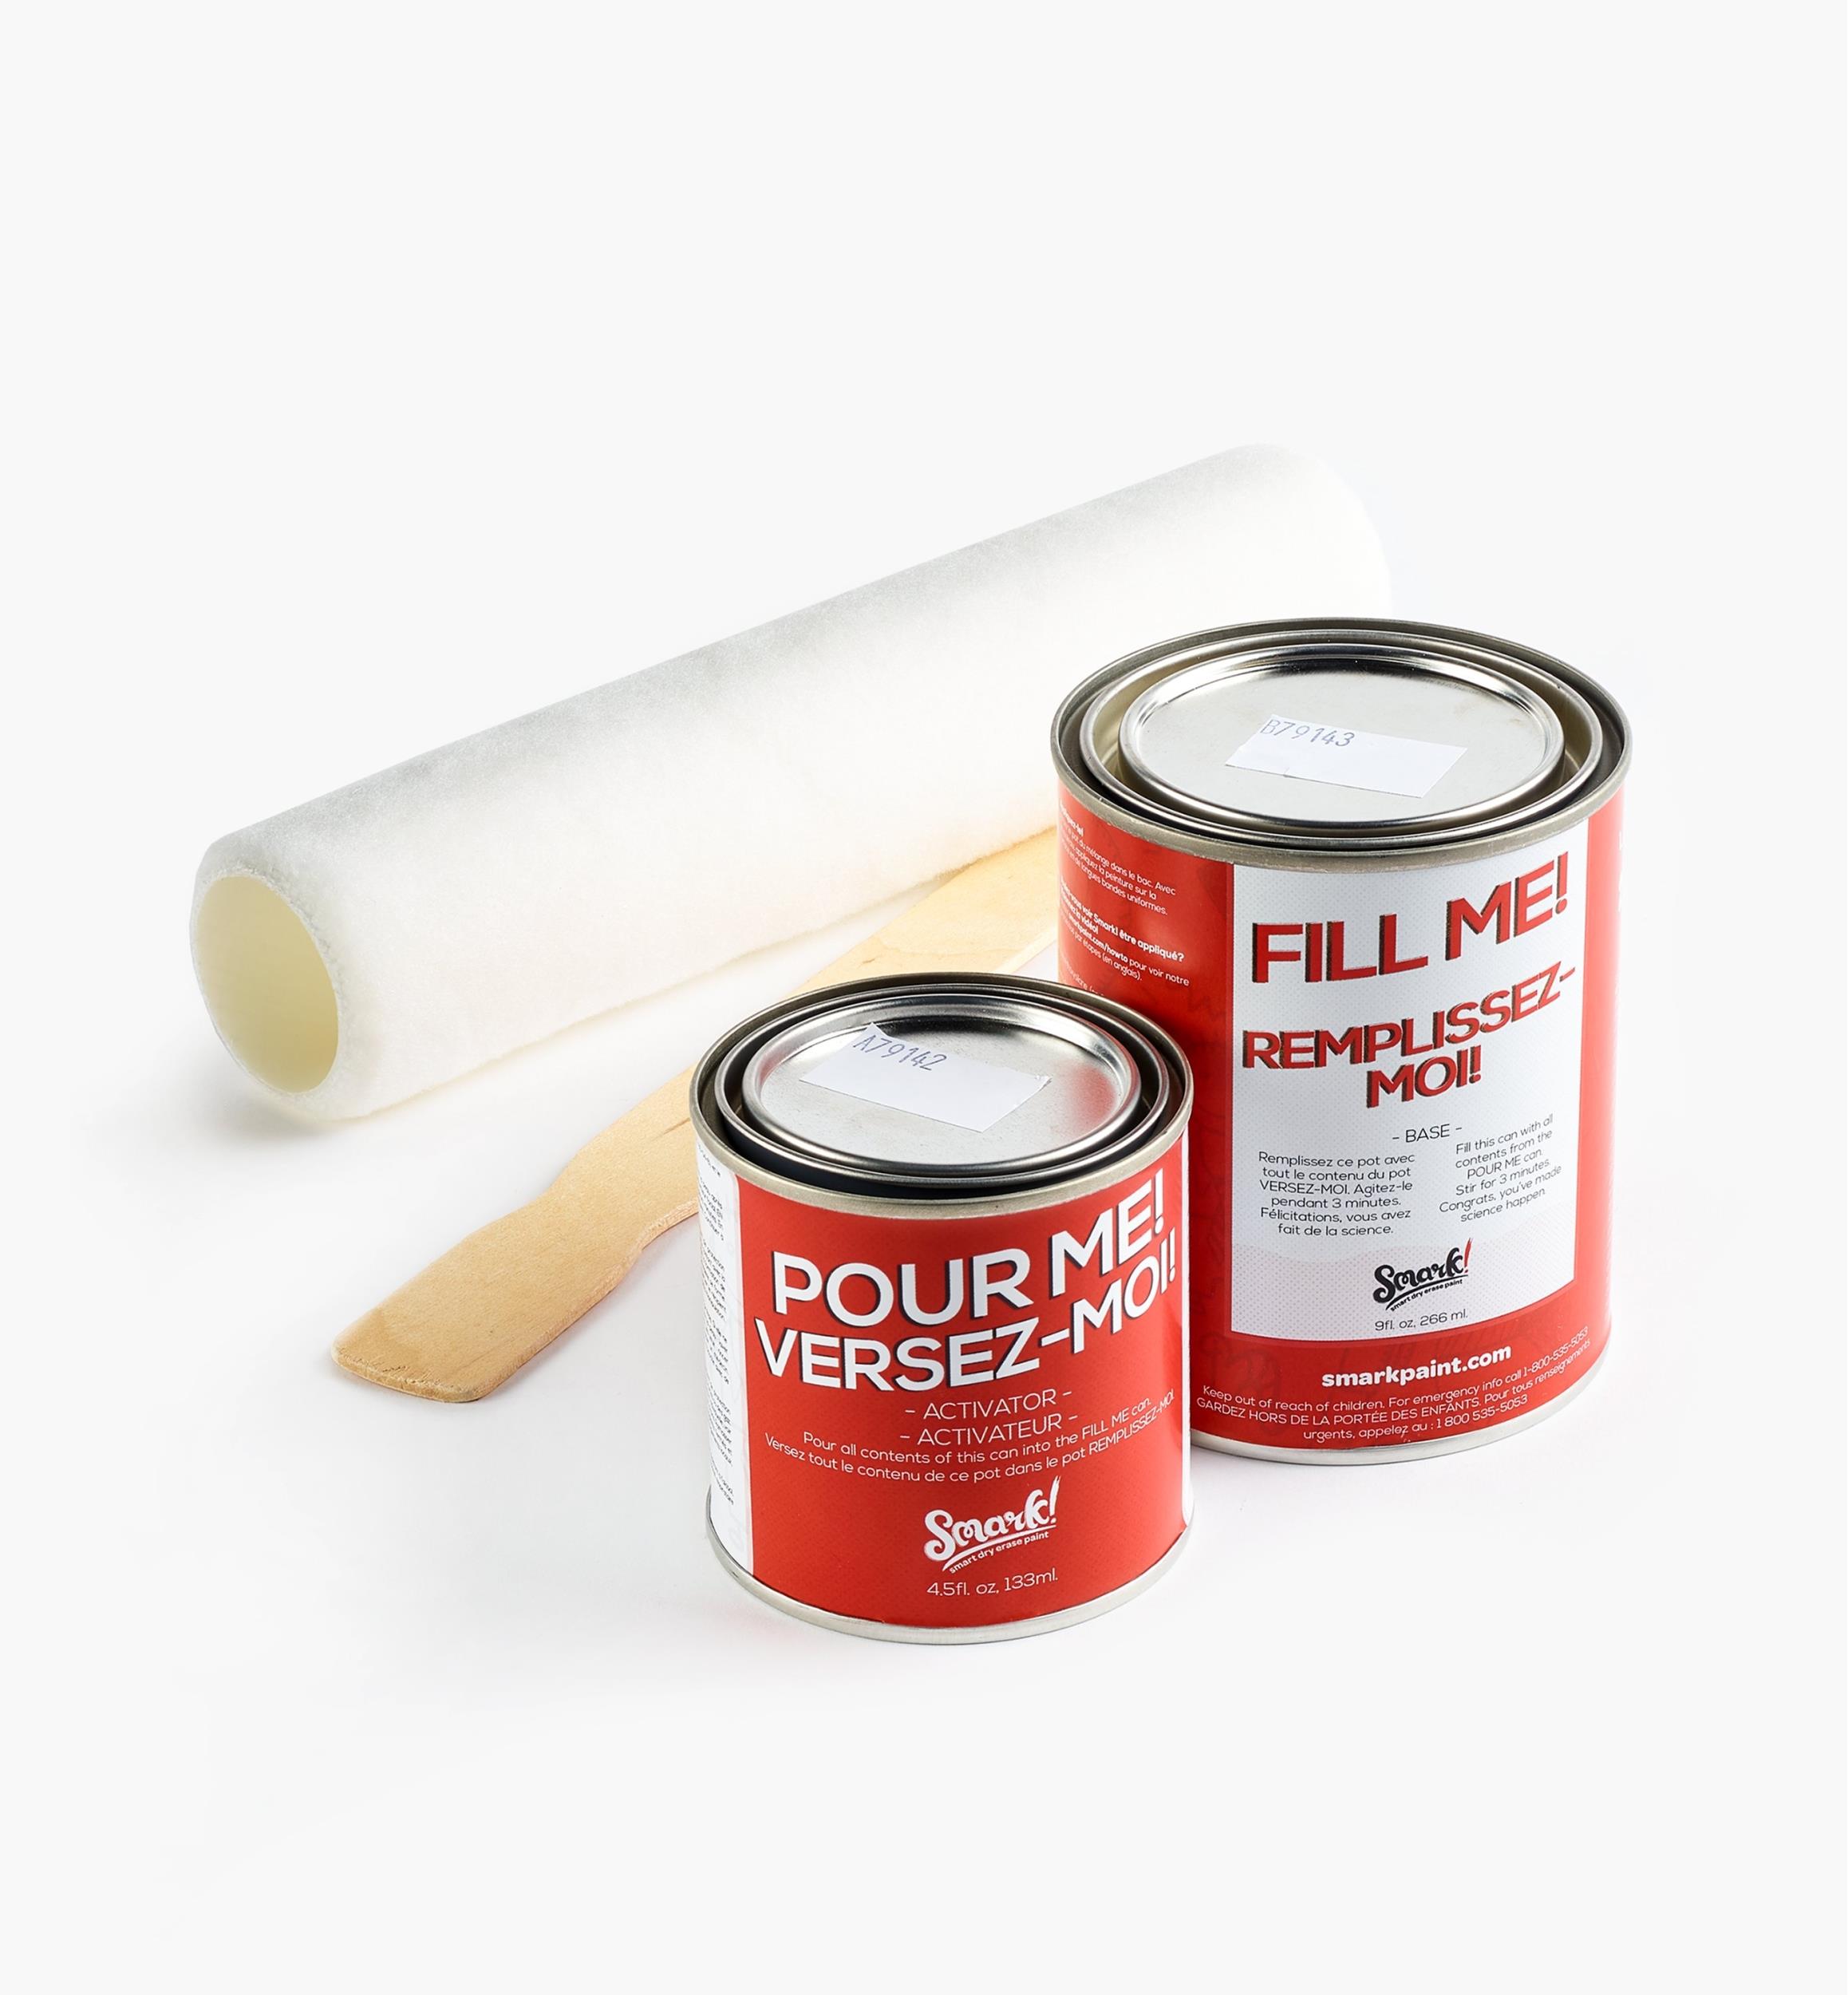 Dry-Erase Paint - Lee Valley Tools